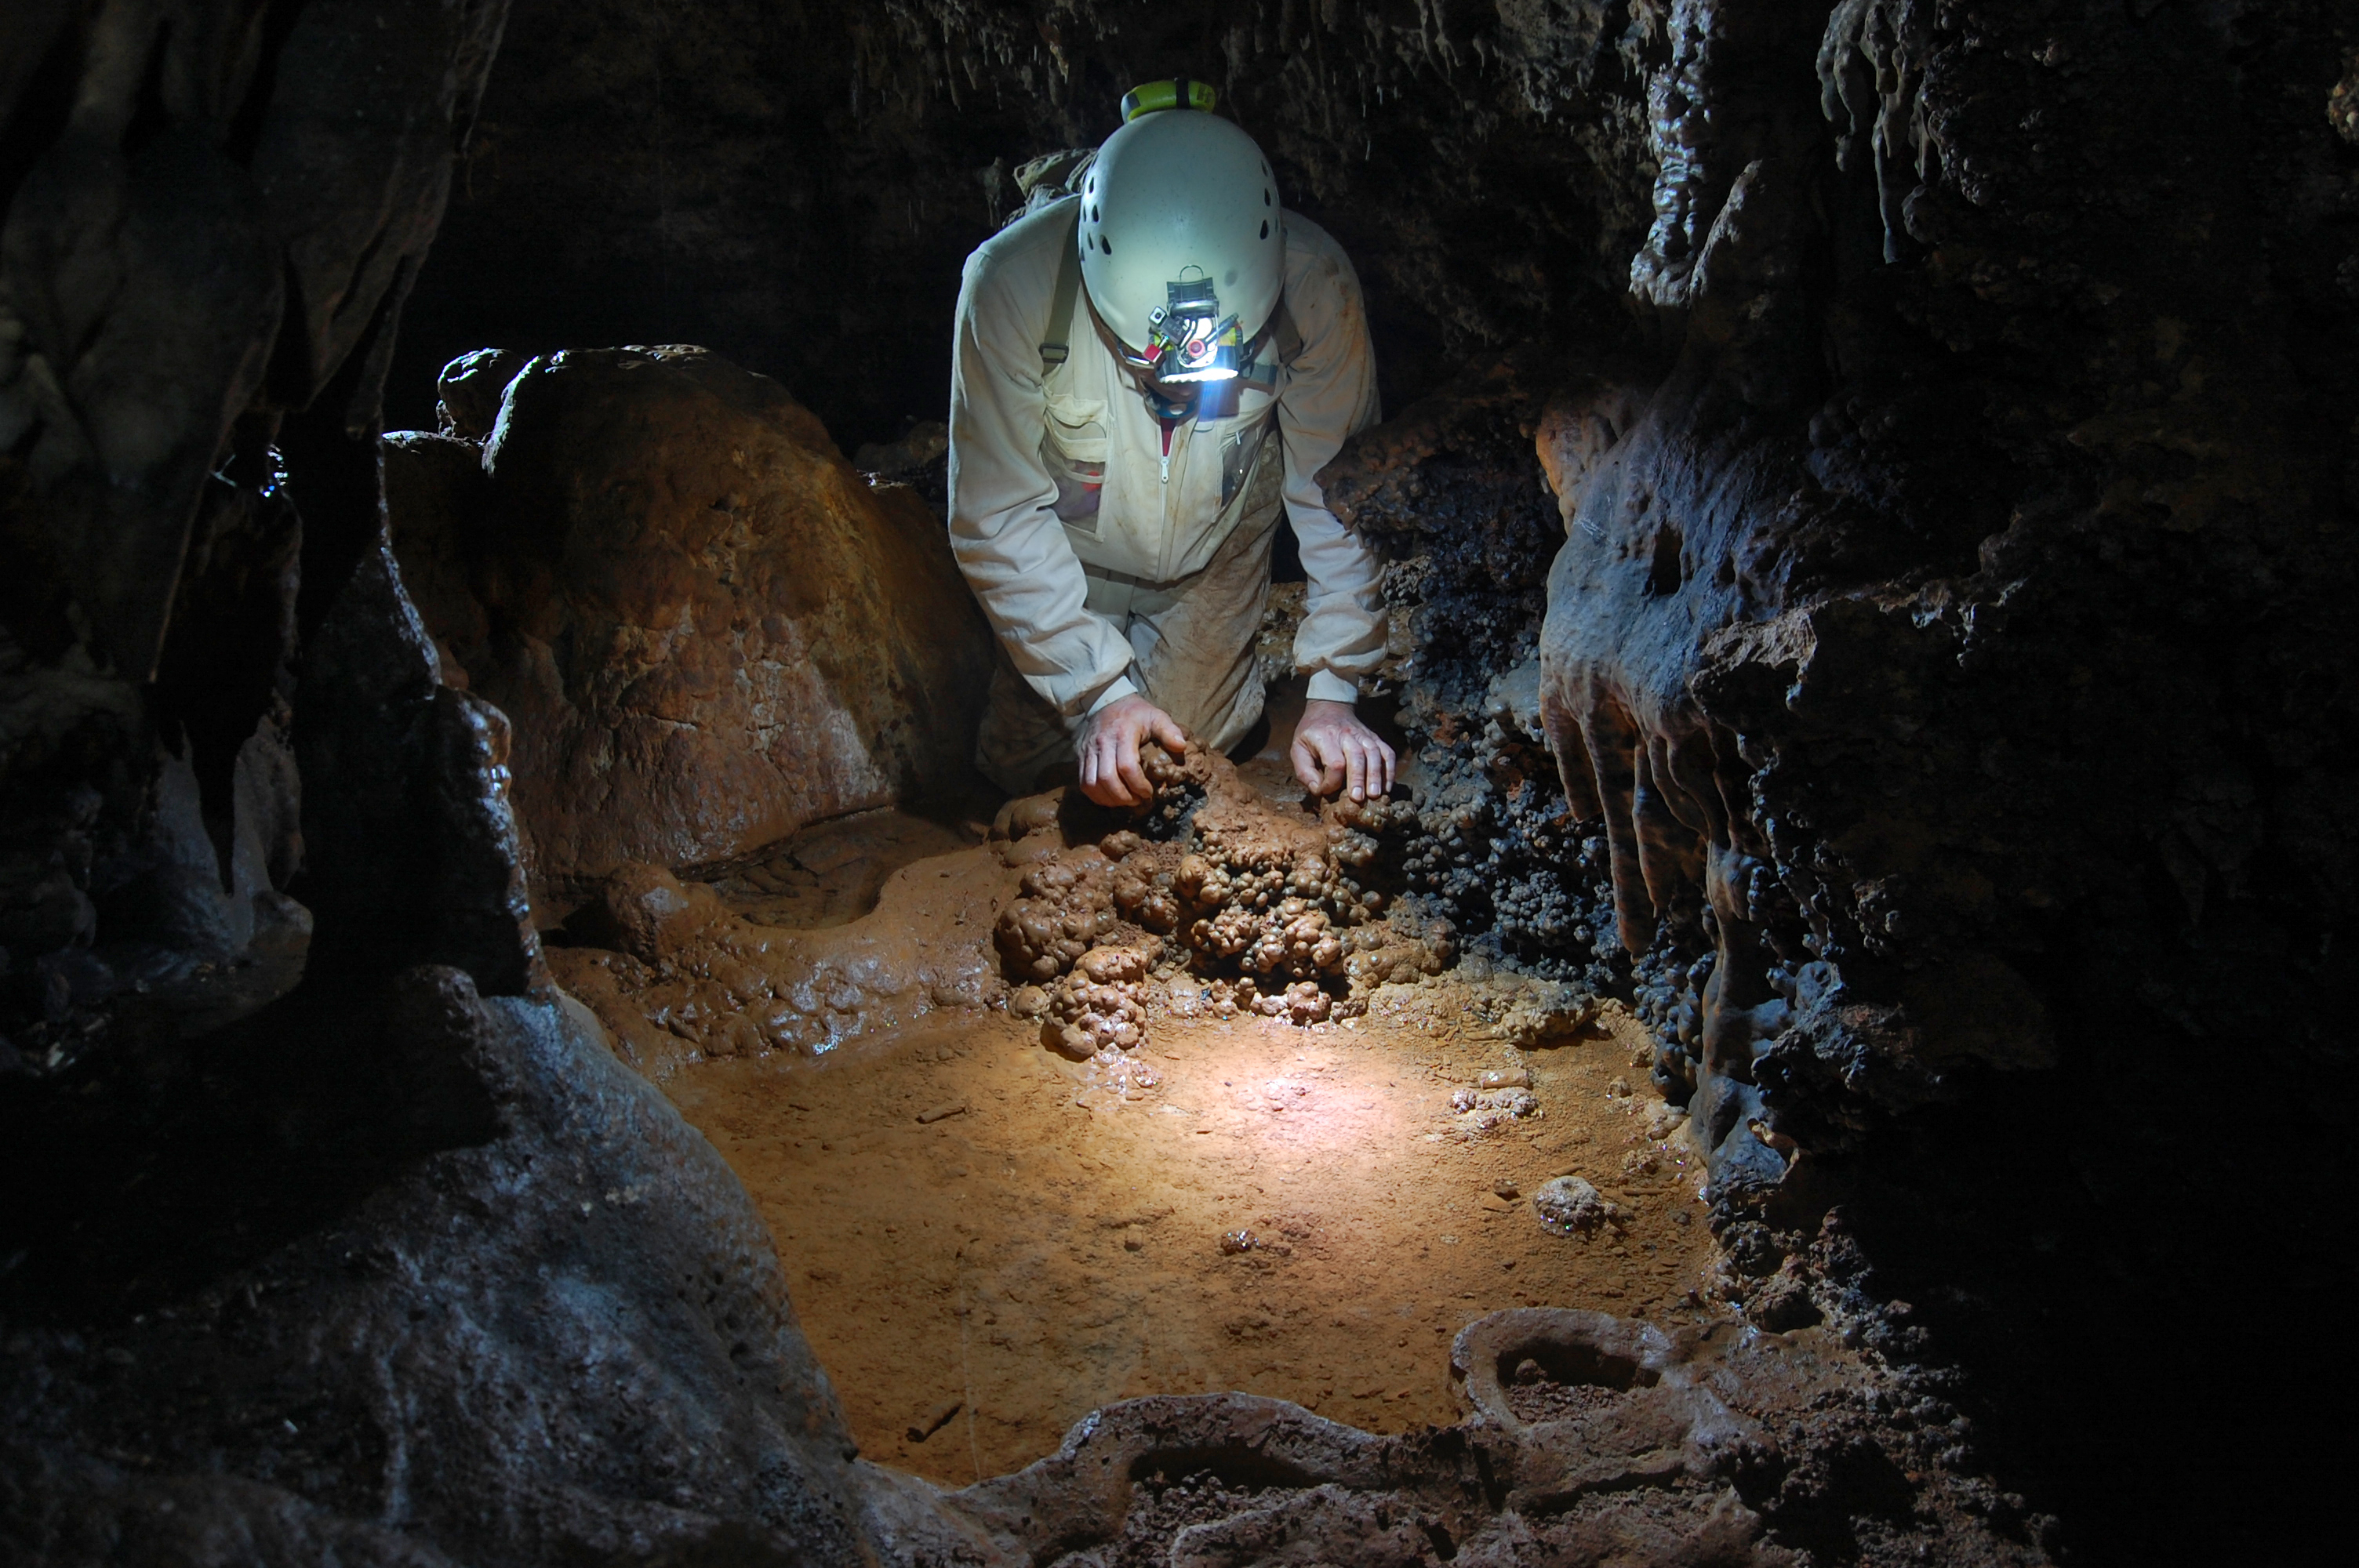 Three new arthropod species have been found in the Maestrazgo Caves ...